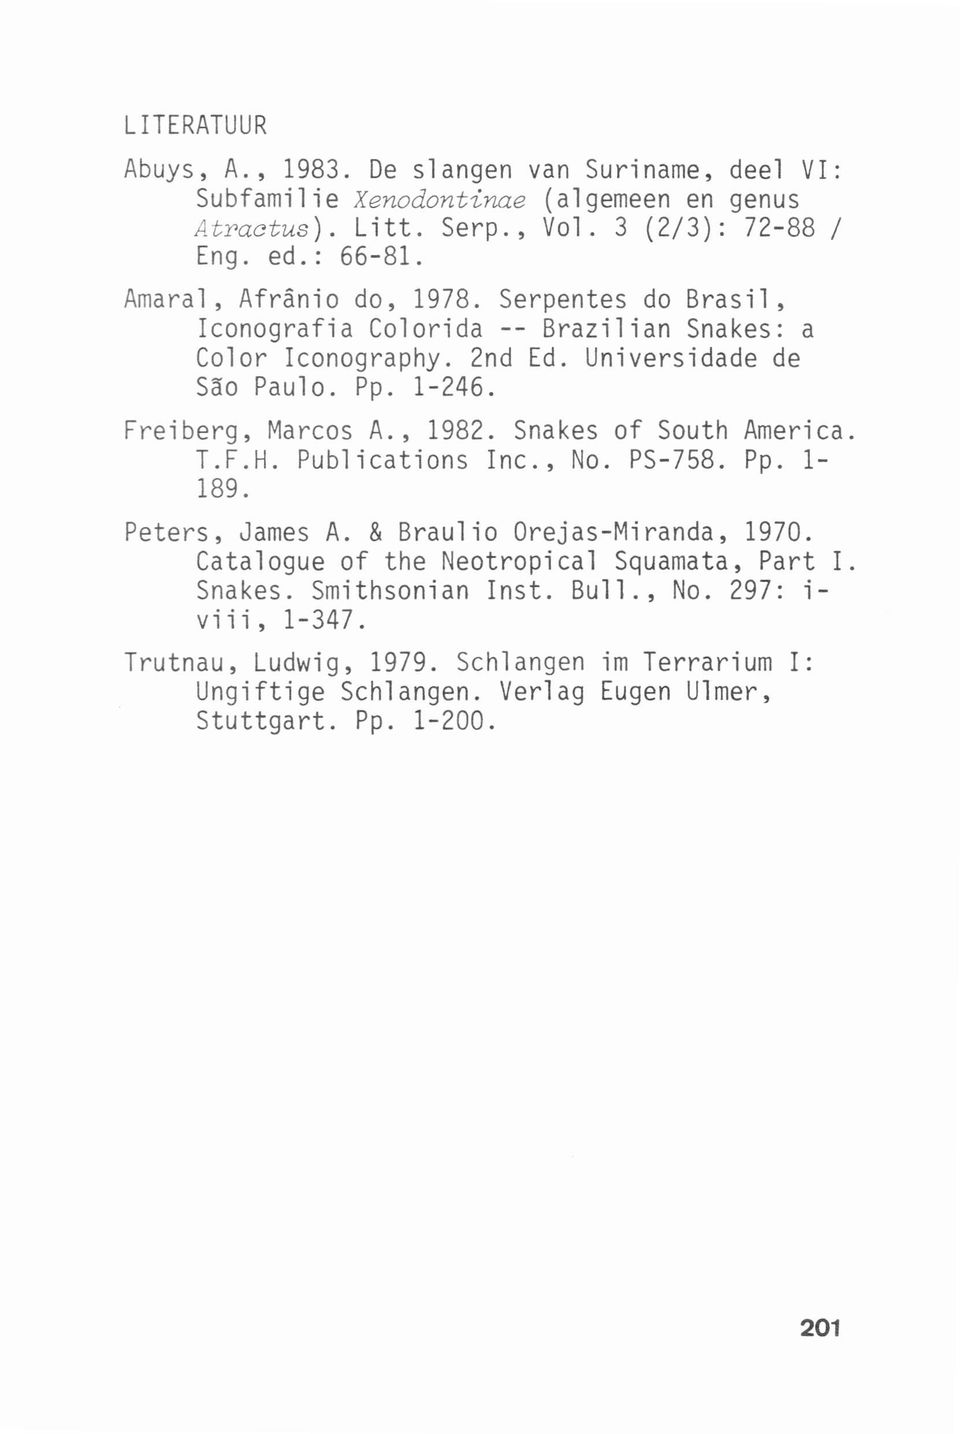 Freiberg, Marcos A., 1982. Snakes of South America. T.F.H. Publ icat'ions Inc., No. PS-758. Pp. 1-189. Peters, James A. & Braulio Orejas-Miranda, 1970.